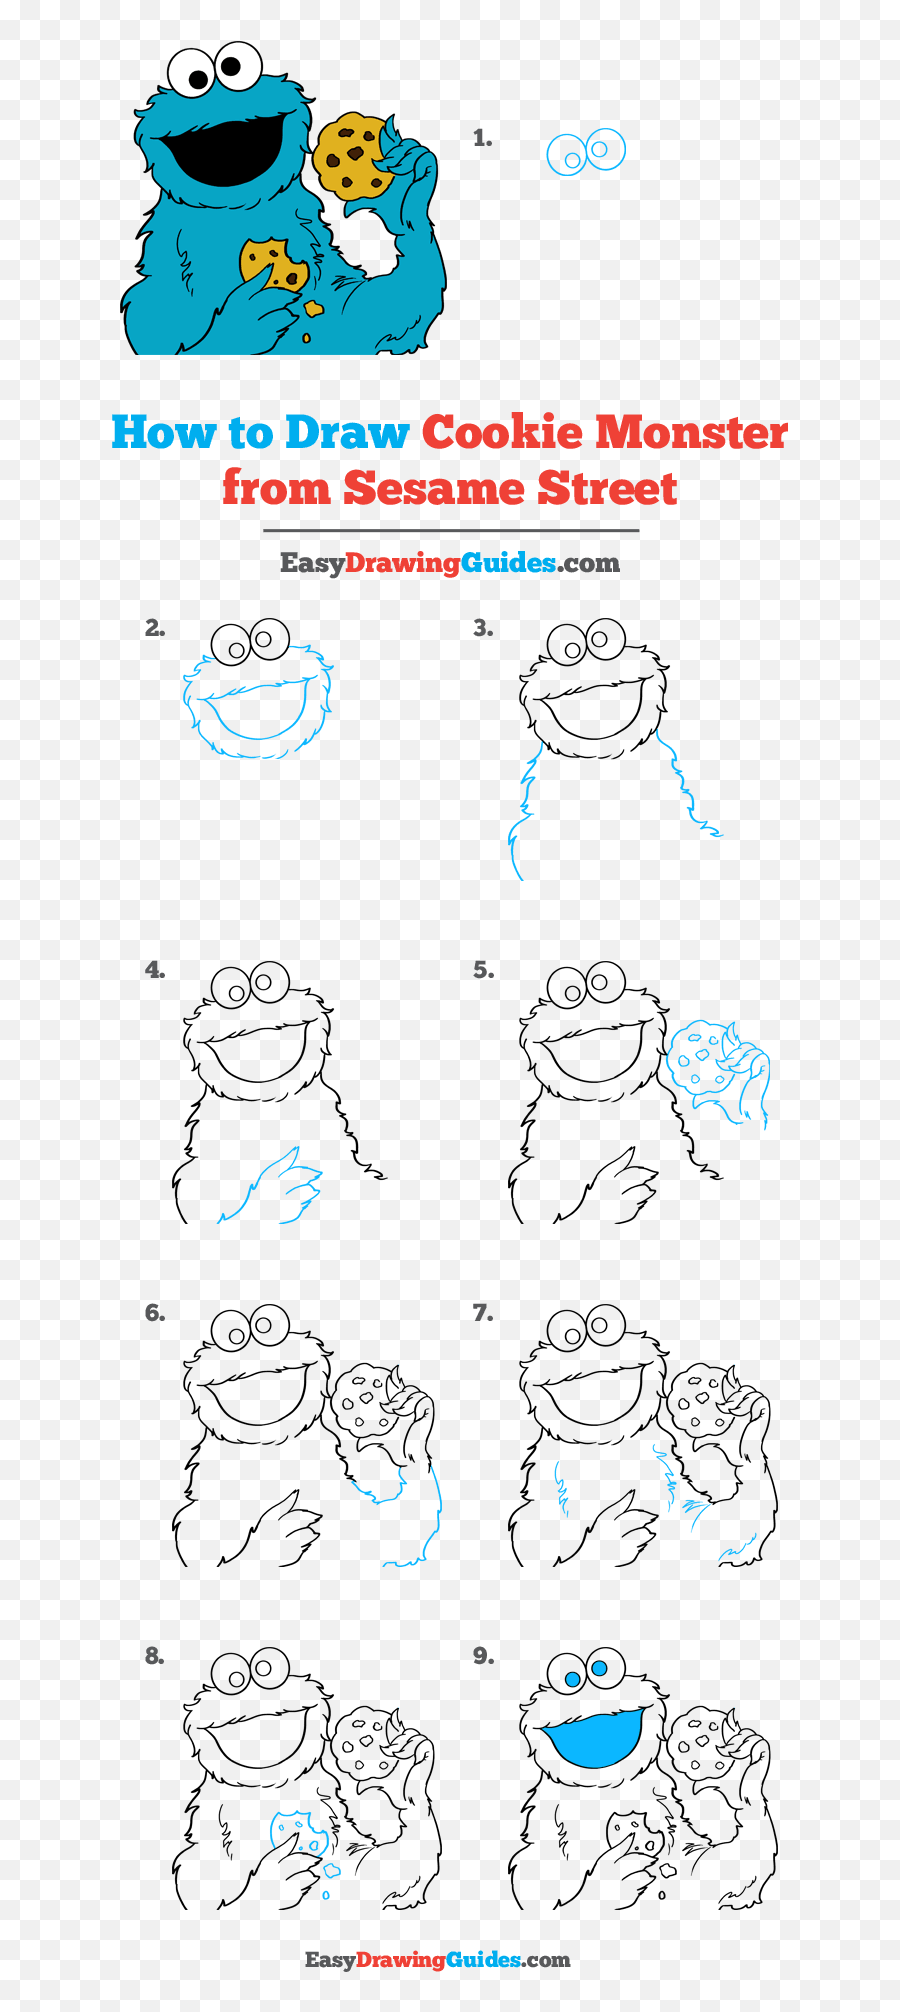 How To Draw Cookie Monster From Sesame Street - Step By Step How To Draw Cookie Monster Emoji,Cookie Monster Emoji